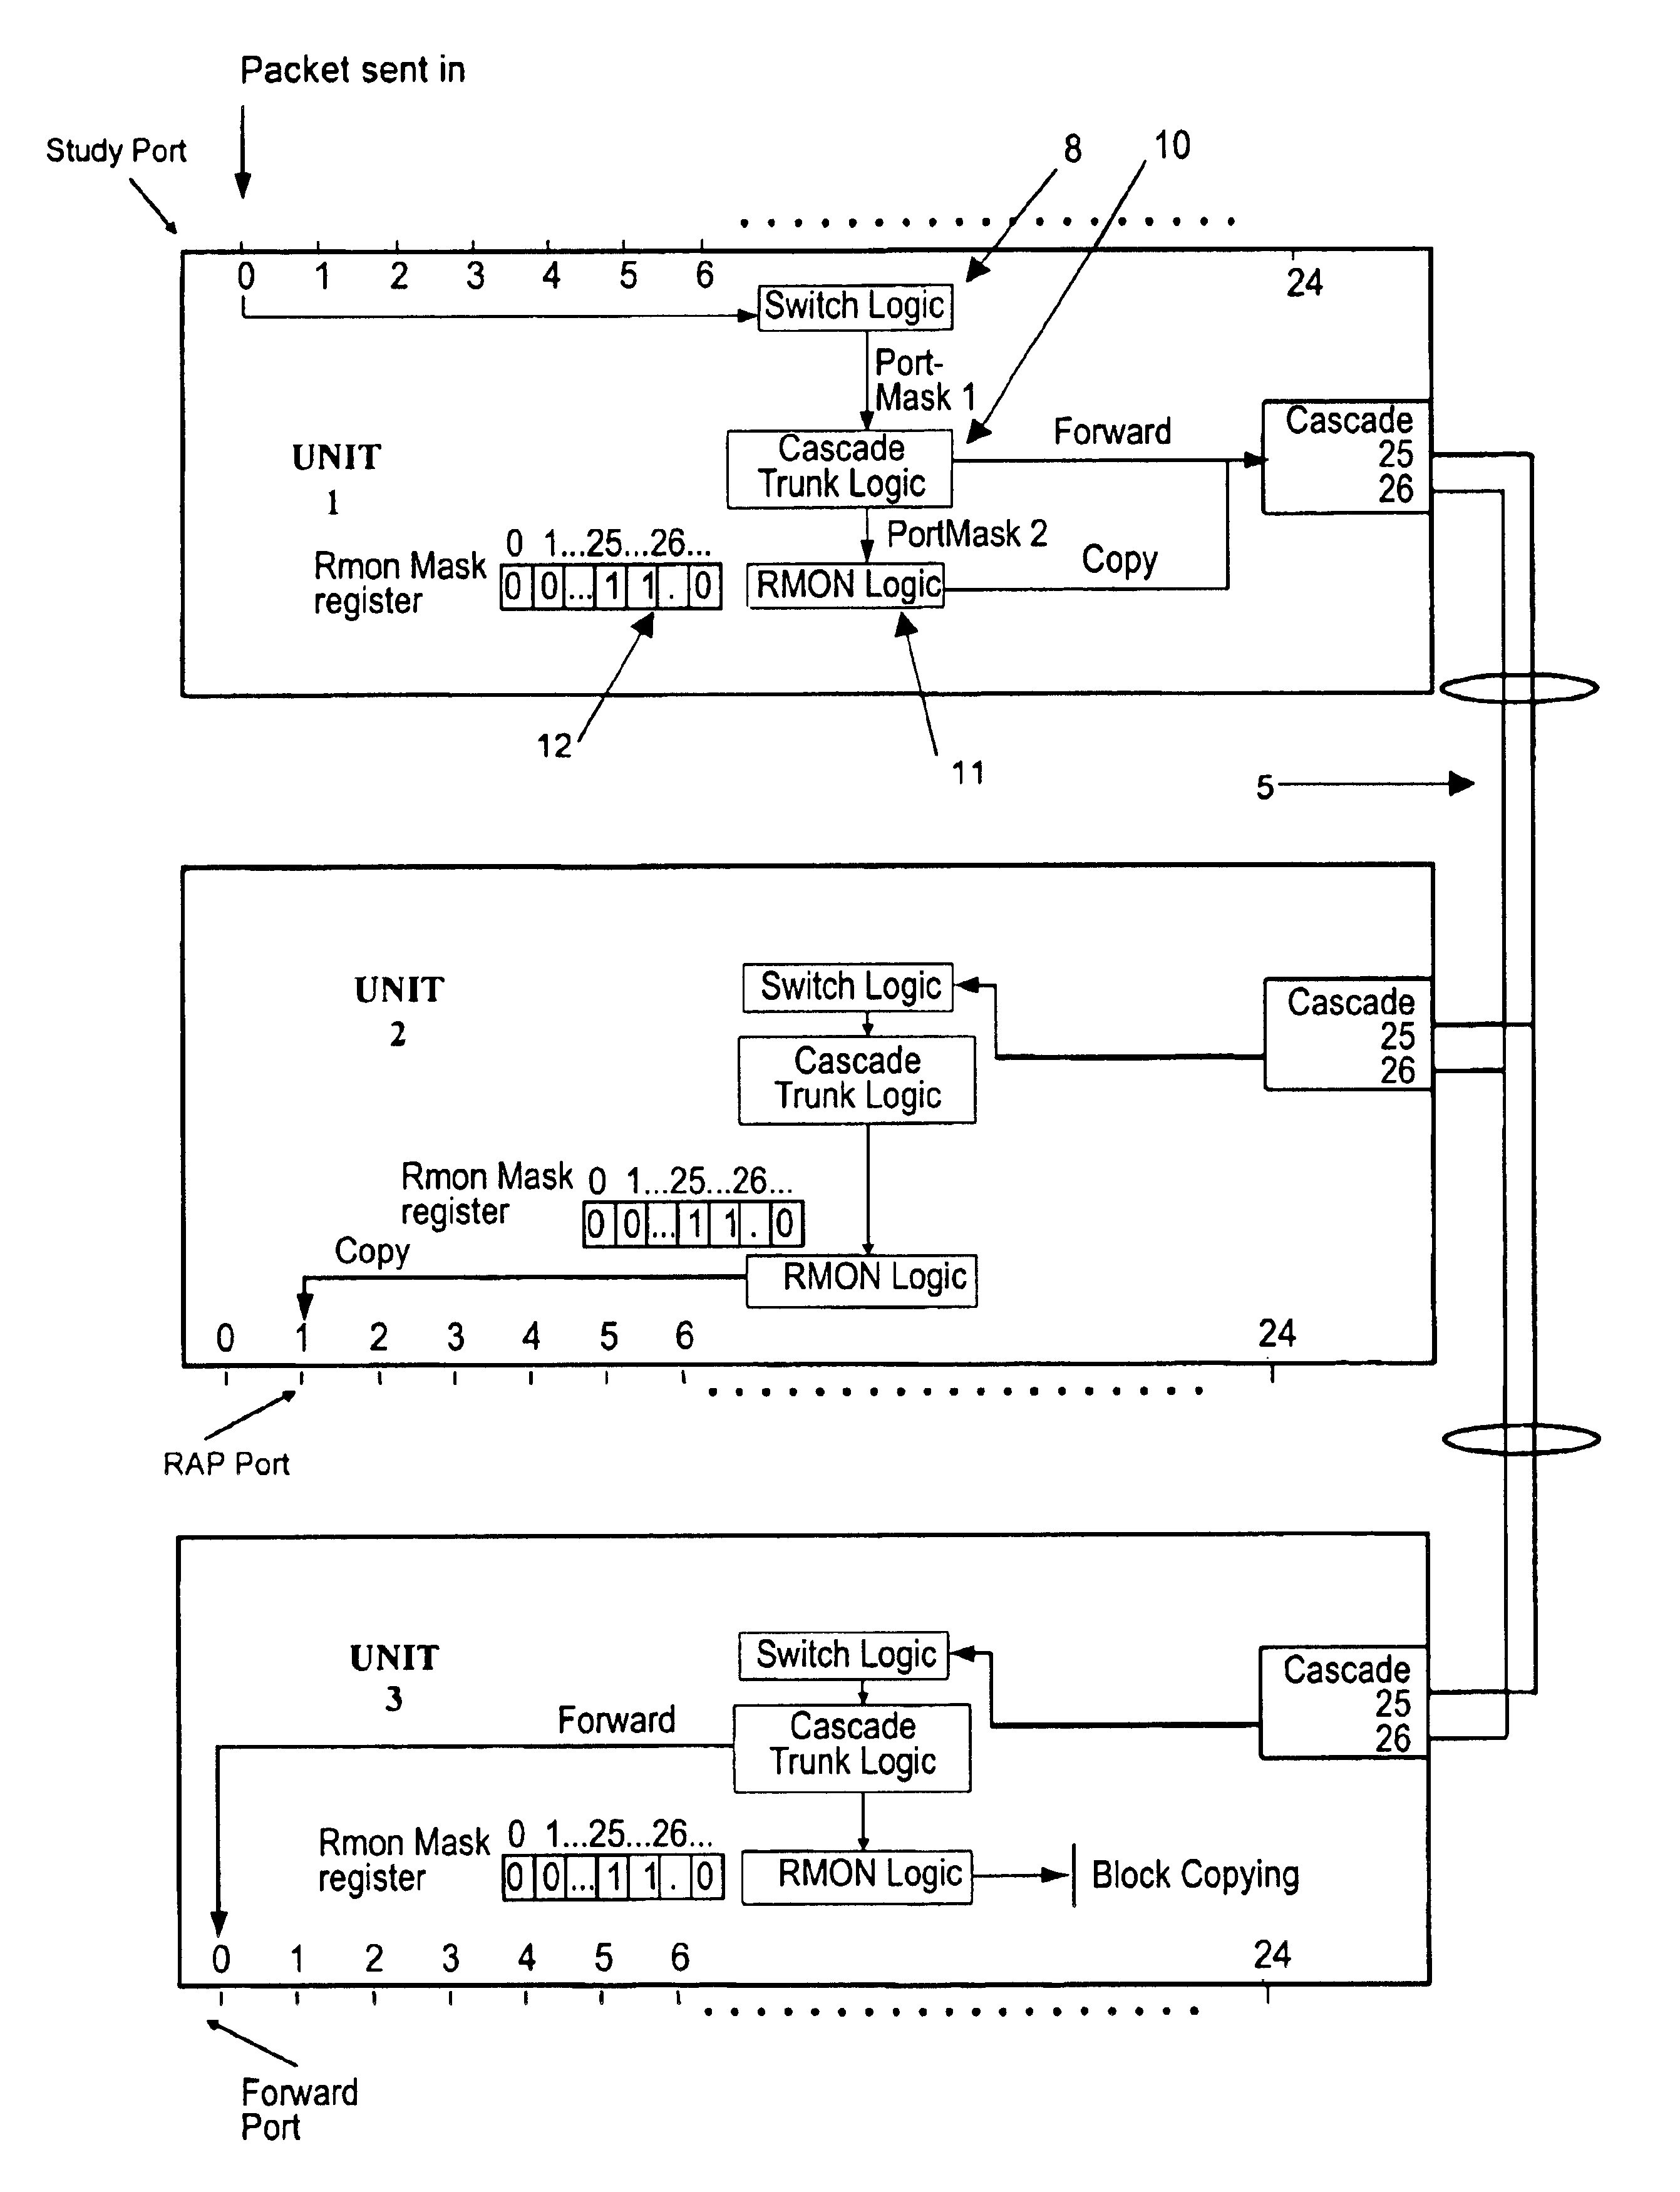 Port mirroring across a trunked stack of multi-port communication devices